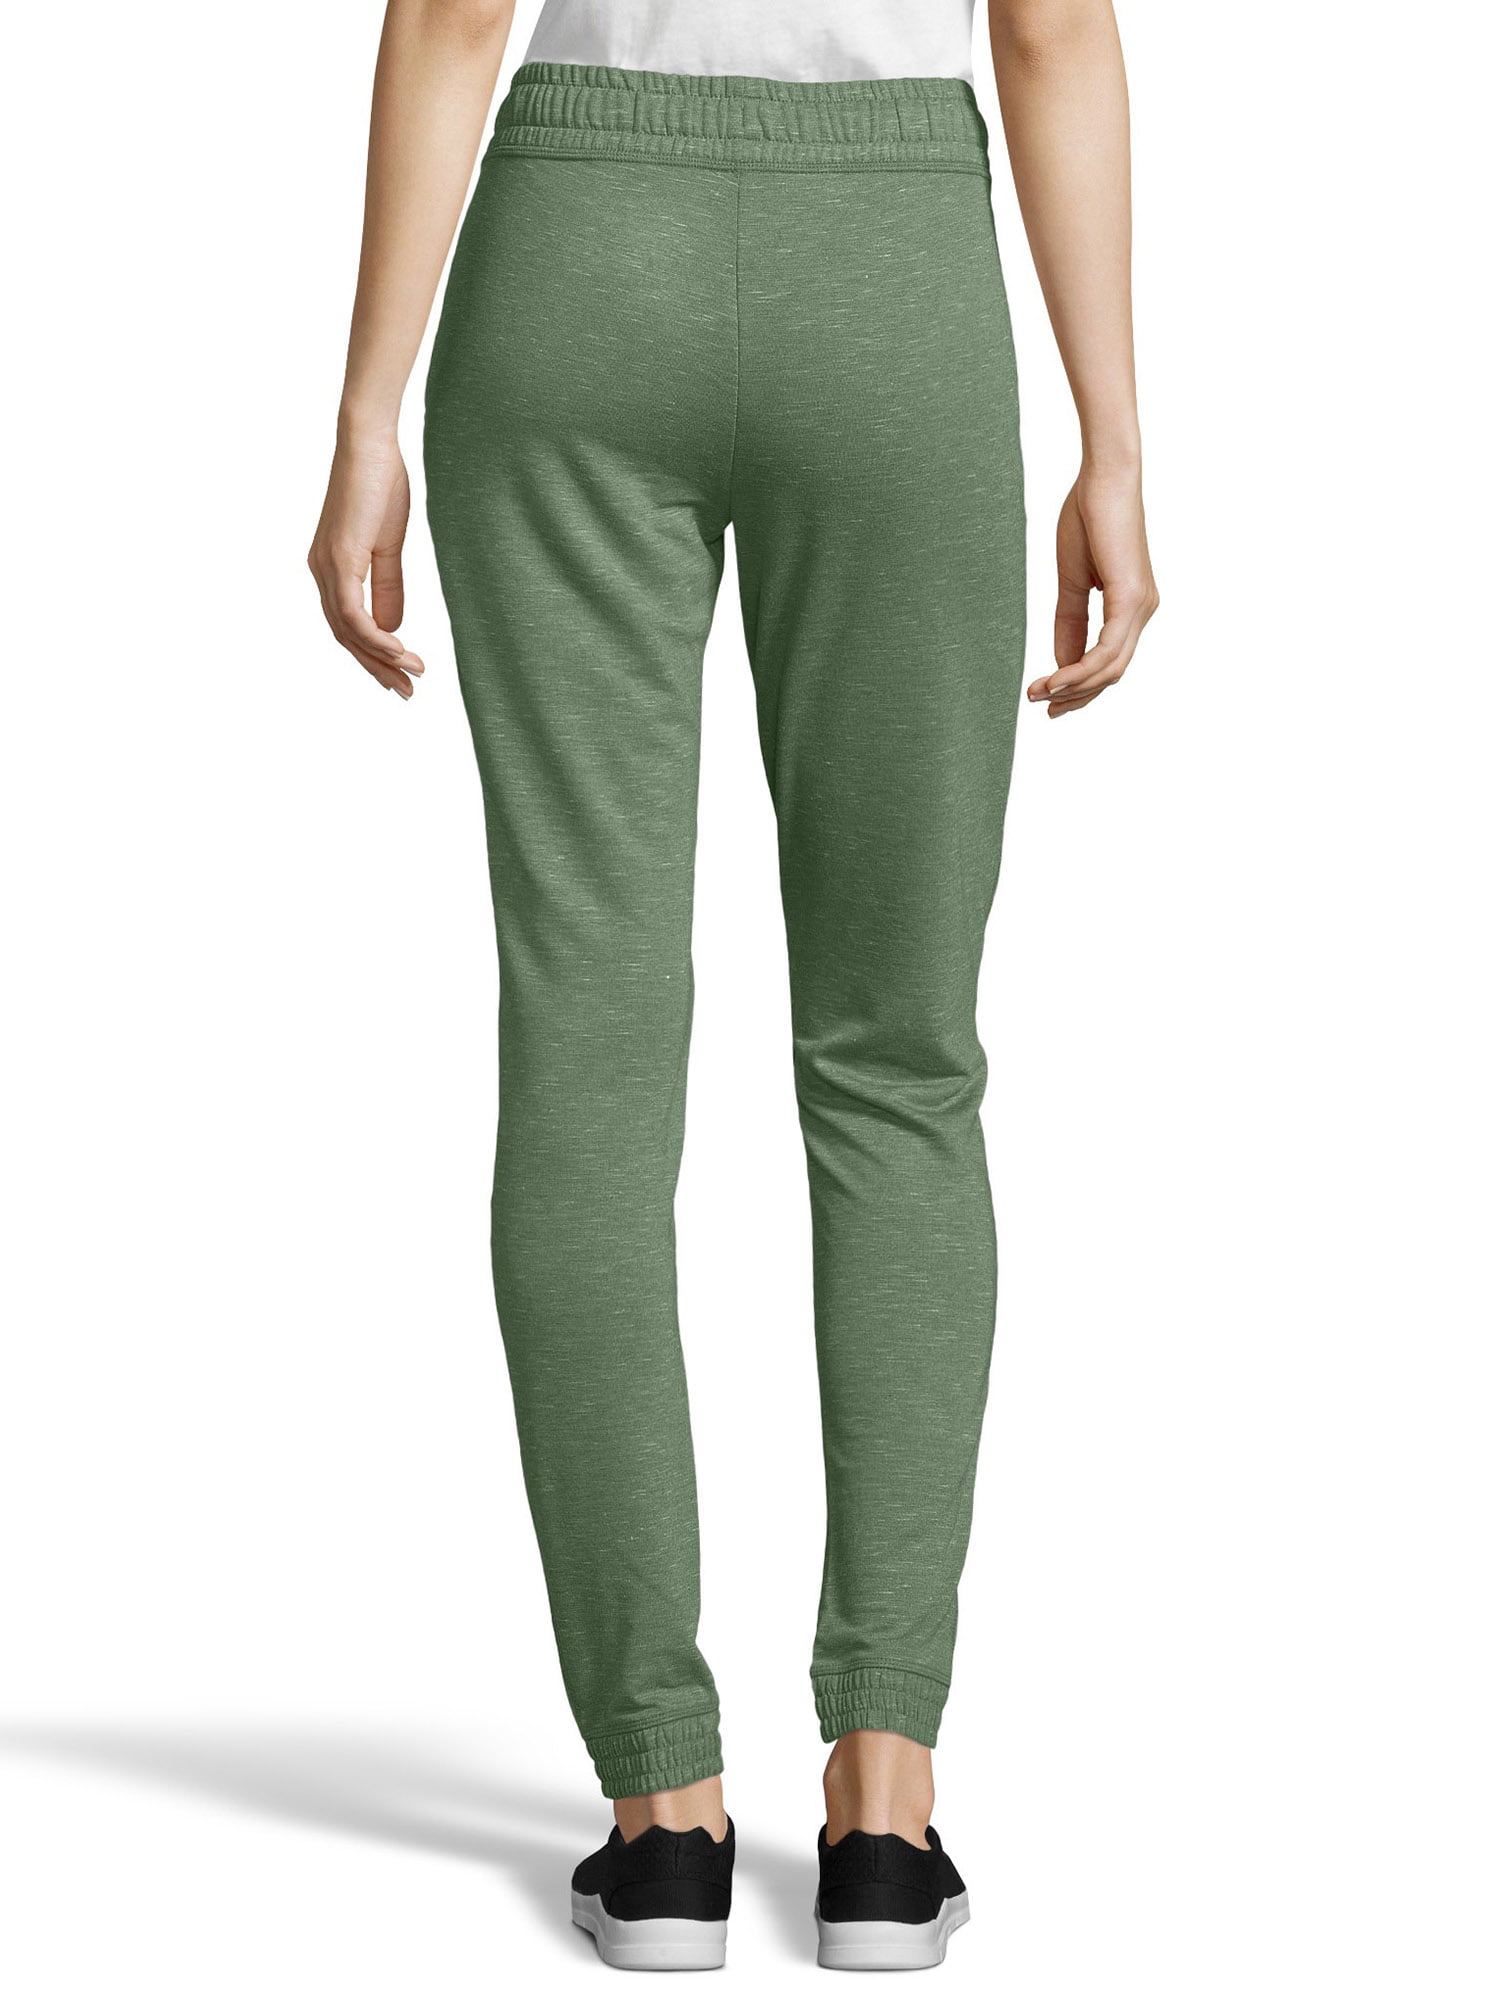 Hanes Women's French Terry Jogger with Pockets - Walmart.com